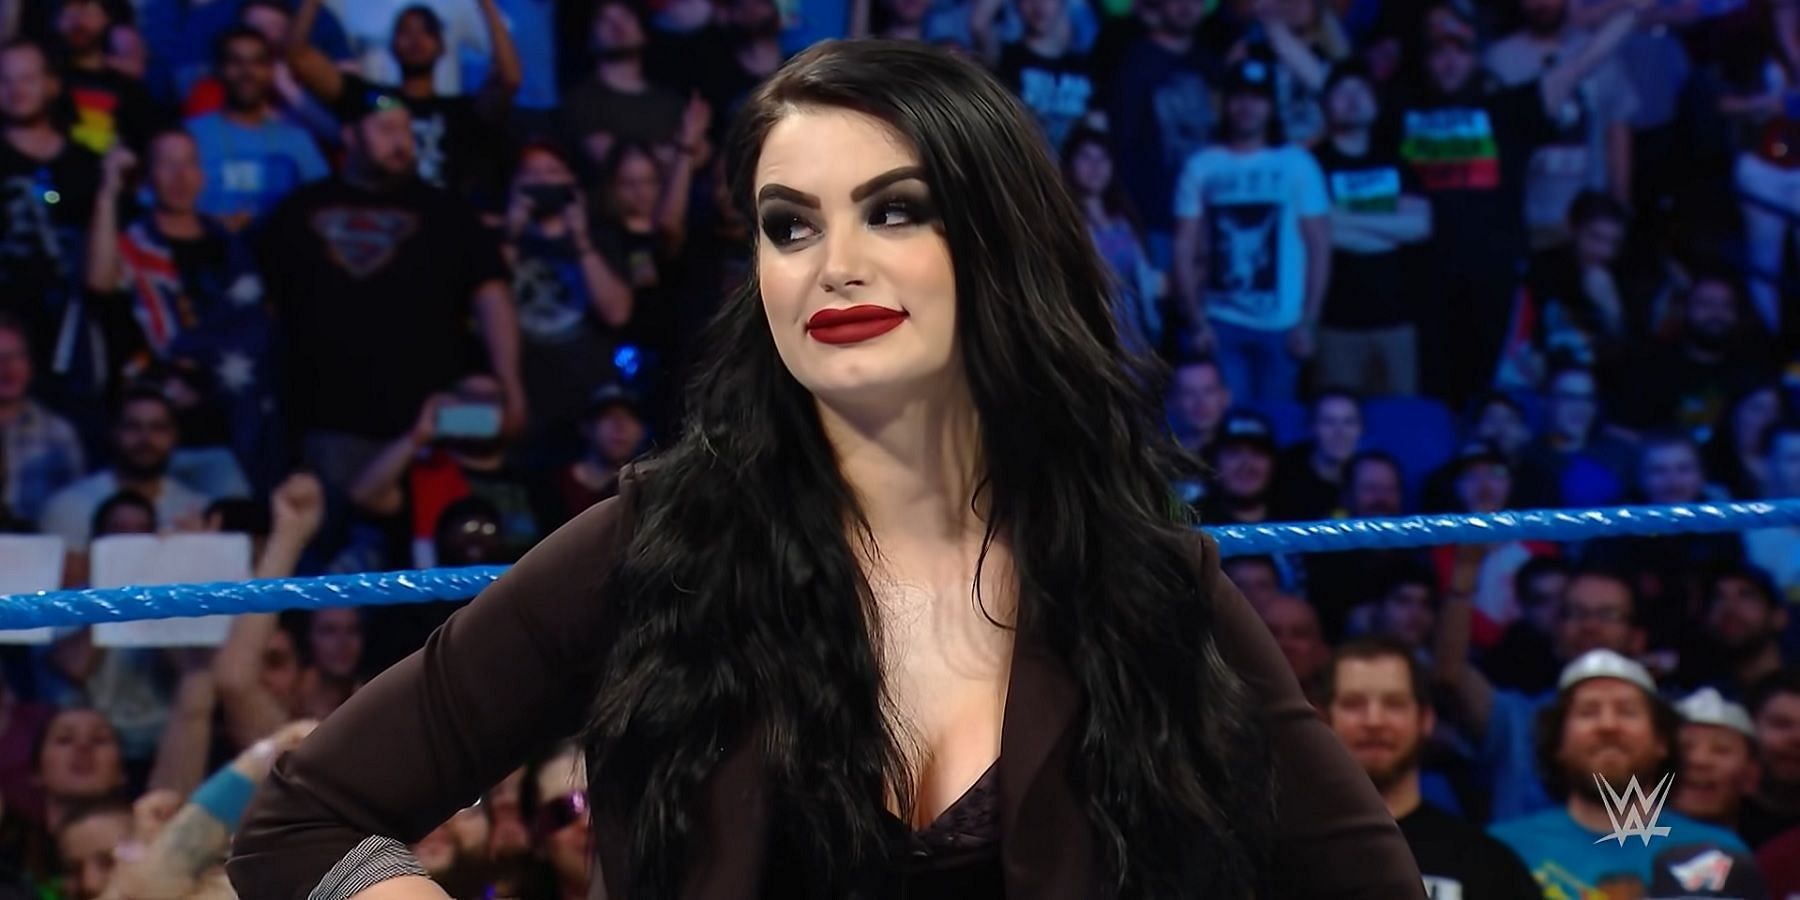 Paige as the SmackDown General Manager